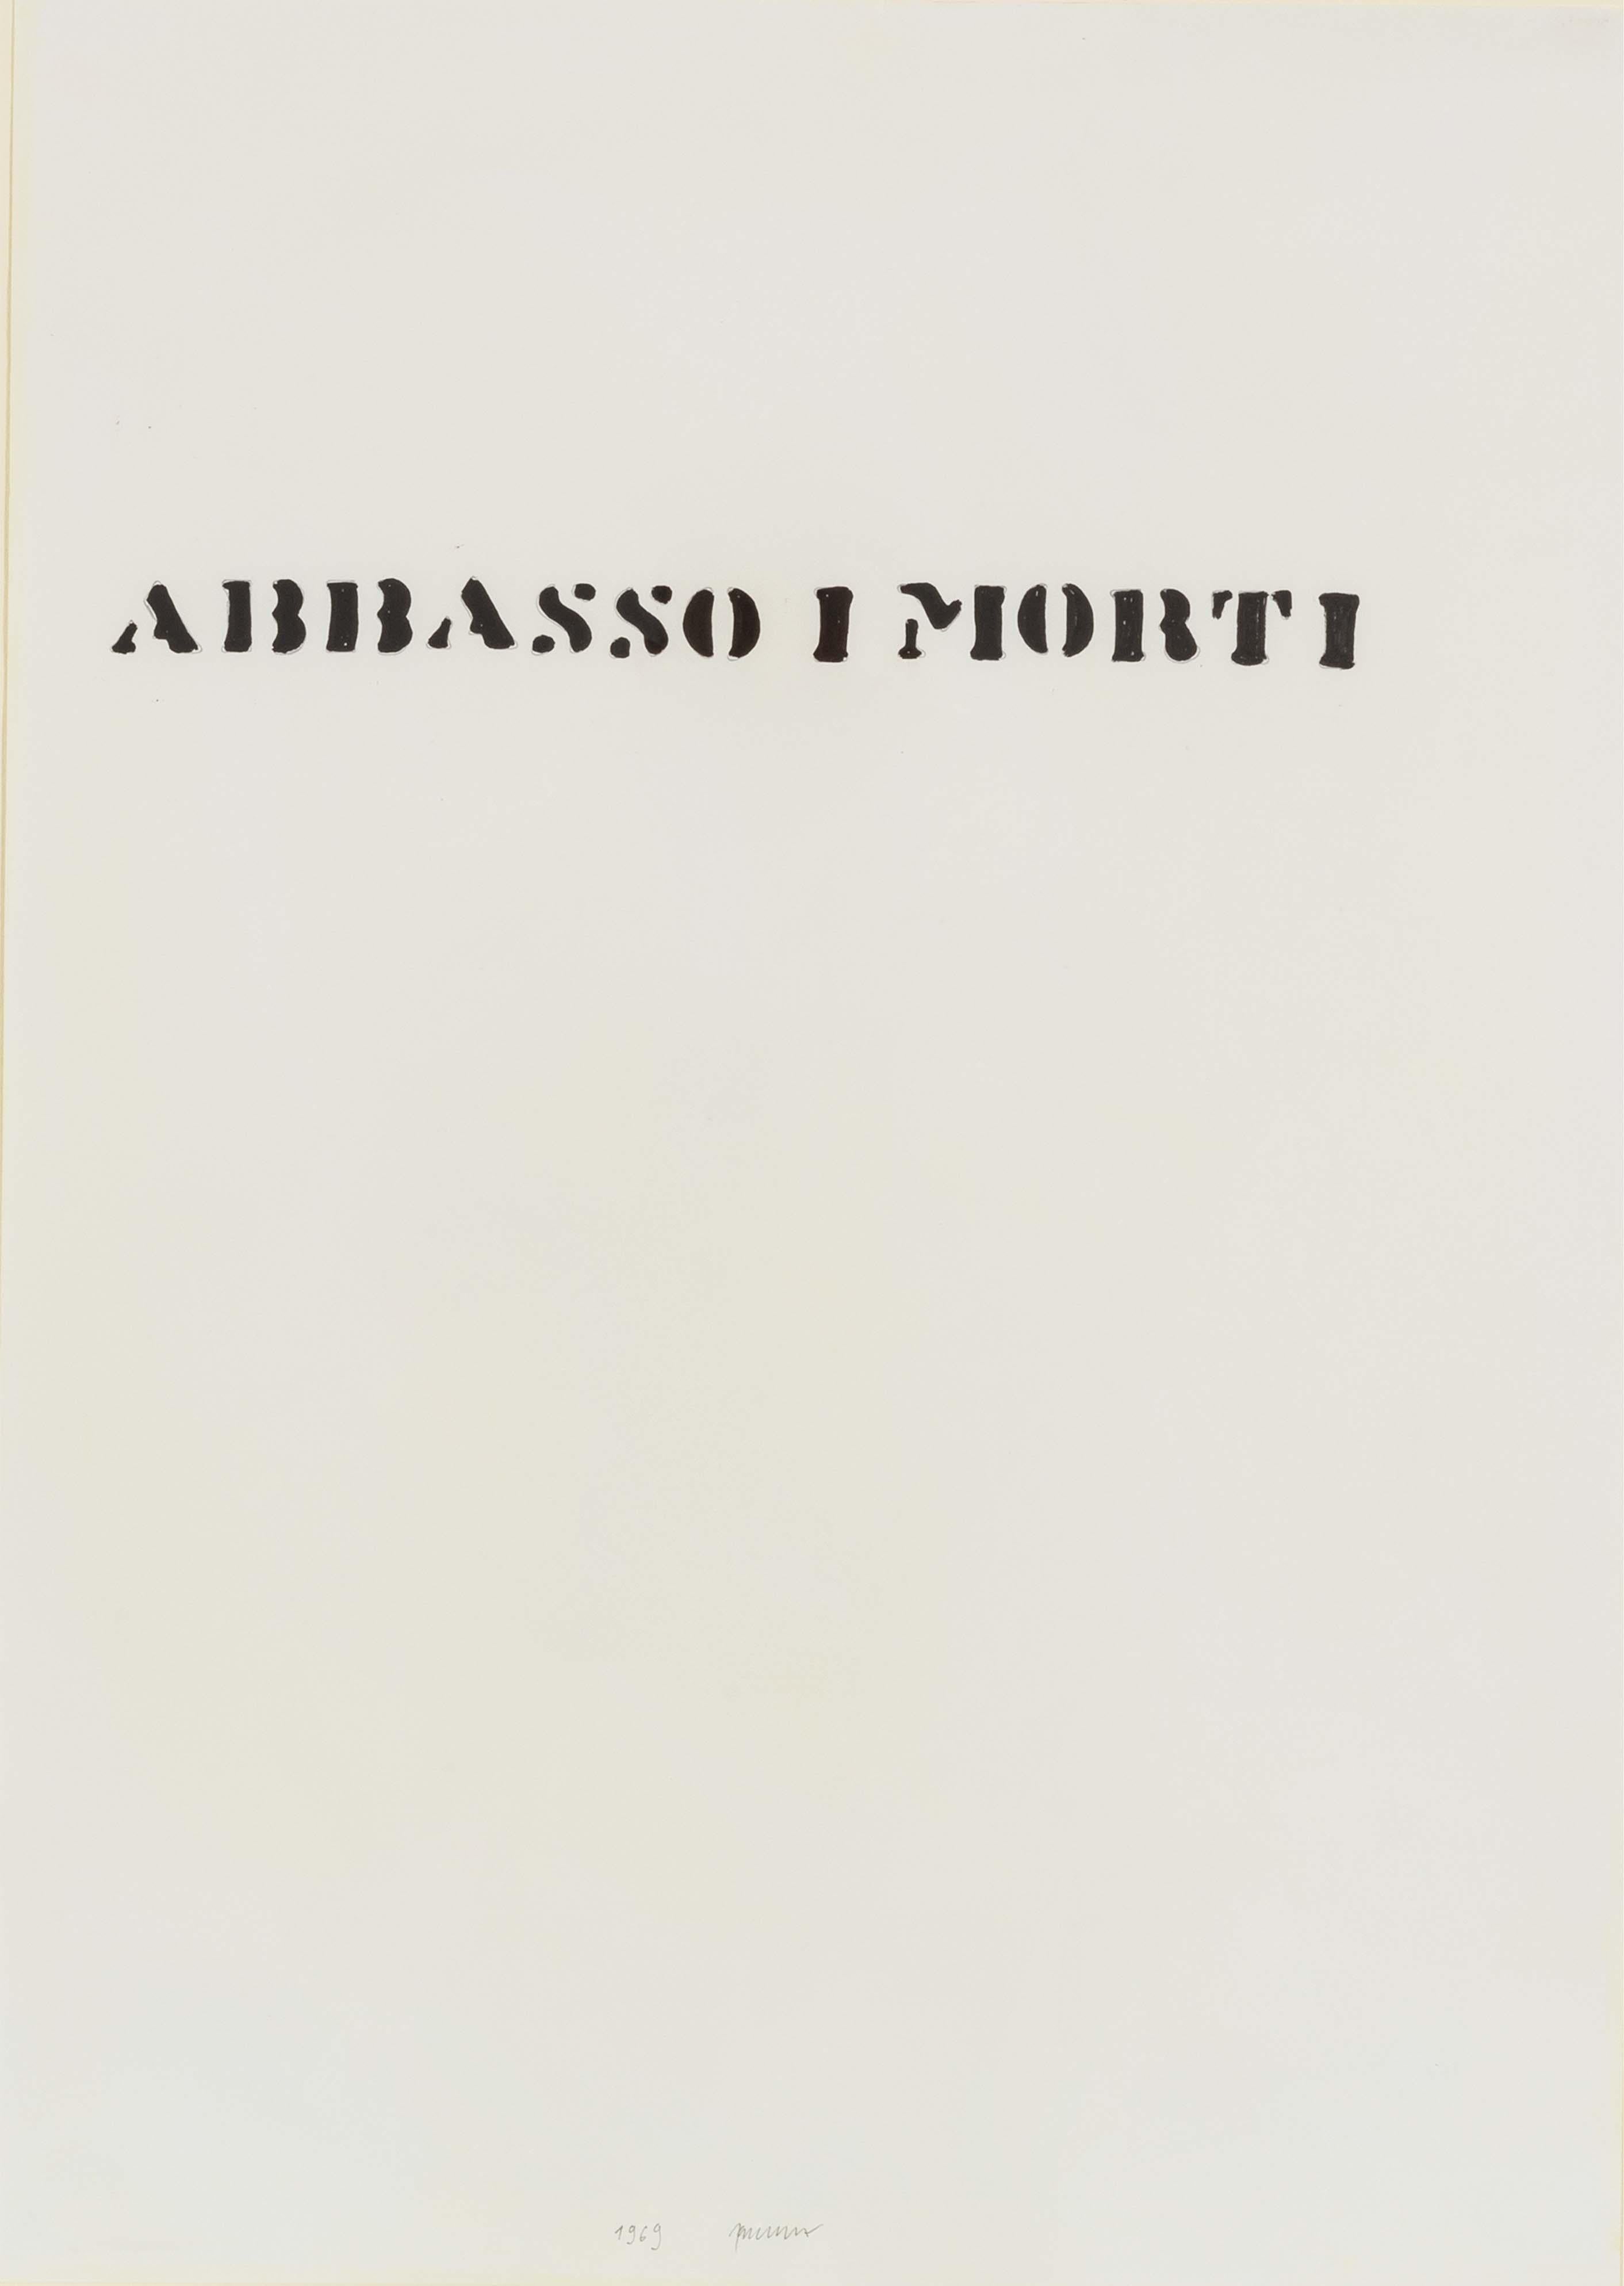 Work from the late 1960s, signed and dated on the front, accompanied by certification of authenticity on photograph issued by the Sarenco Foundation.
Coming from the Sarenco Foundation, Italy.
Poiché il pezzo viaggia dall'Italia, si prega di